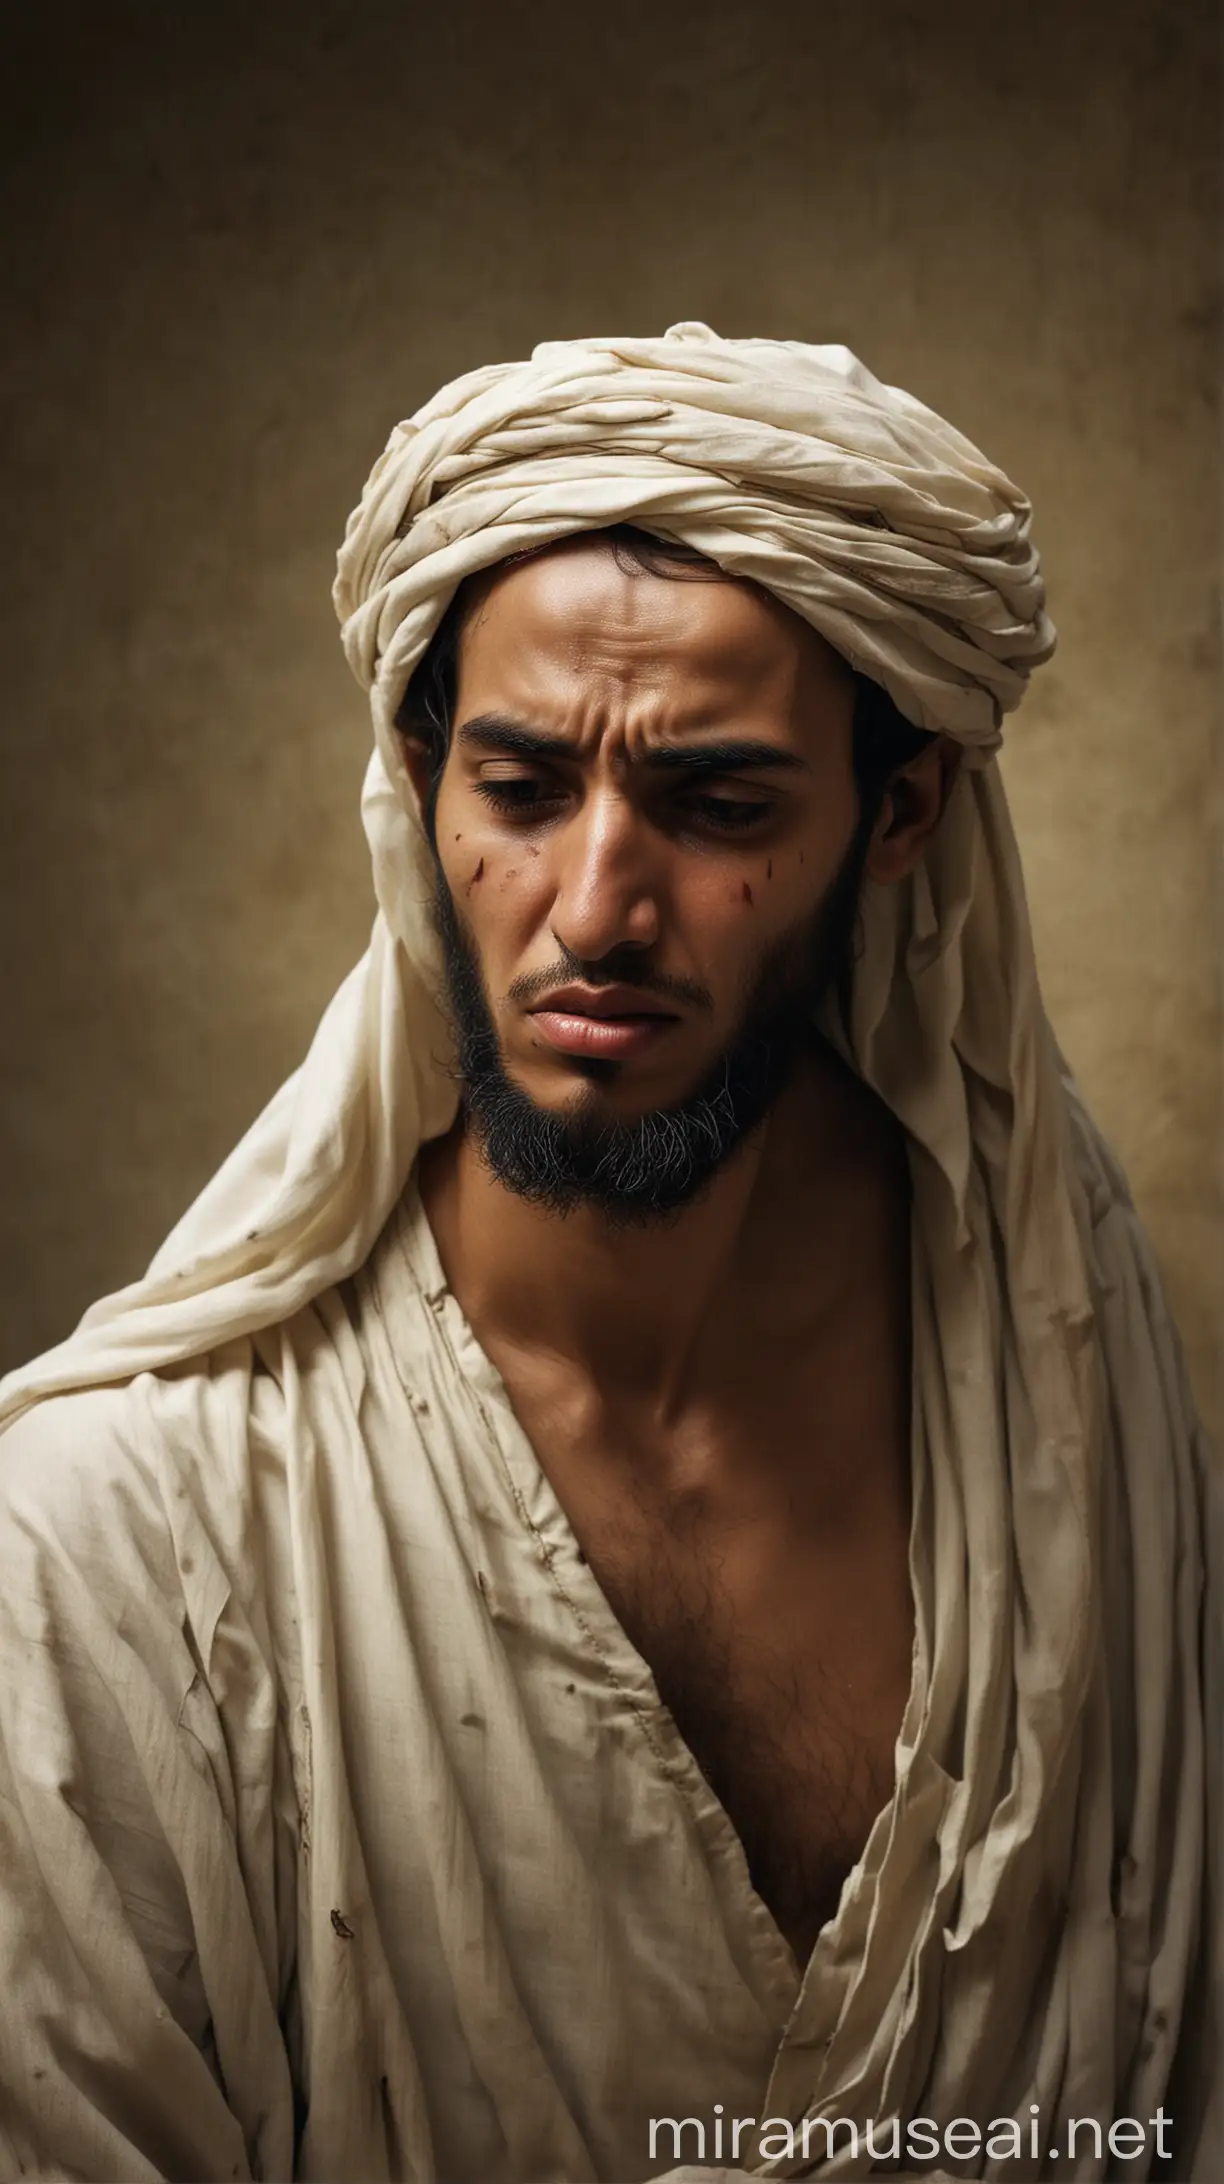 The Prophet Muhammad in Distress: Generate an image of Prophet Muhammad (peace be upon him) during the period of affliction, showing him in a state of physical and mental distress. The image should convey his suffering through facial expressions and body language, while also depicting his unwavering faith and resilience.
